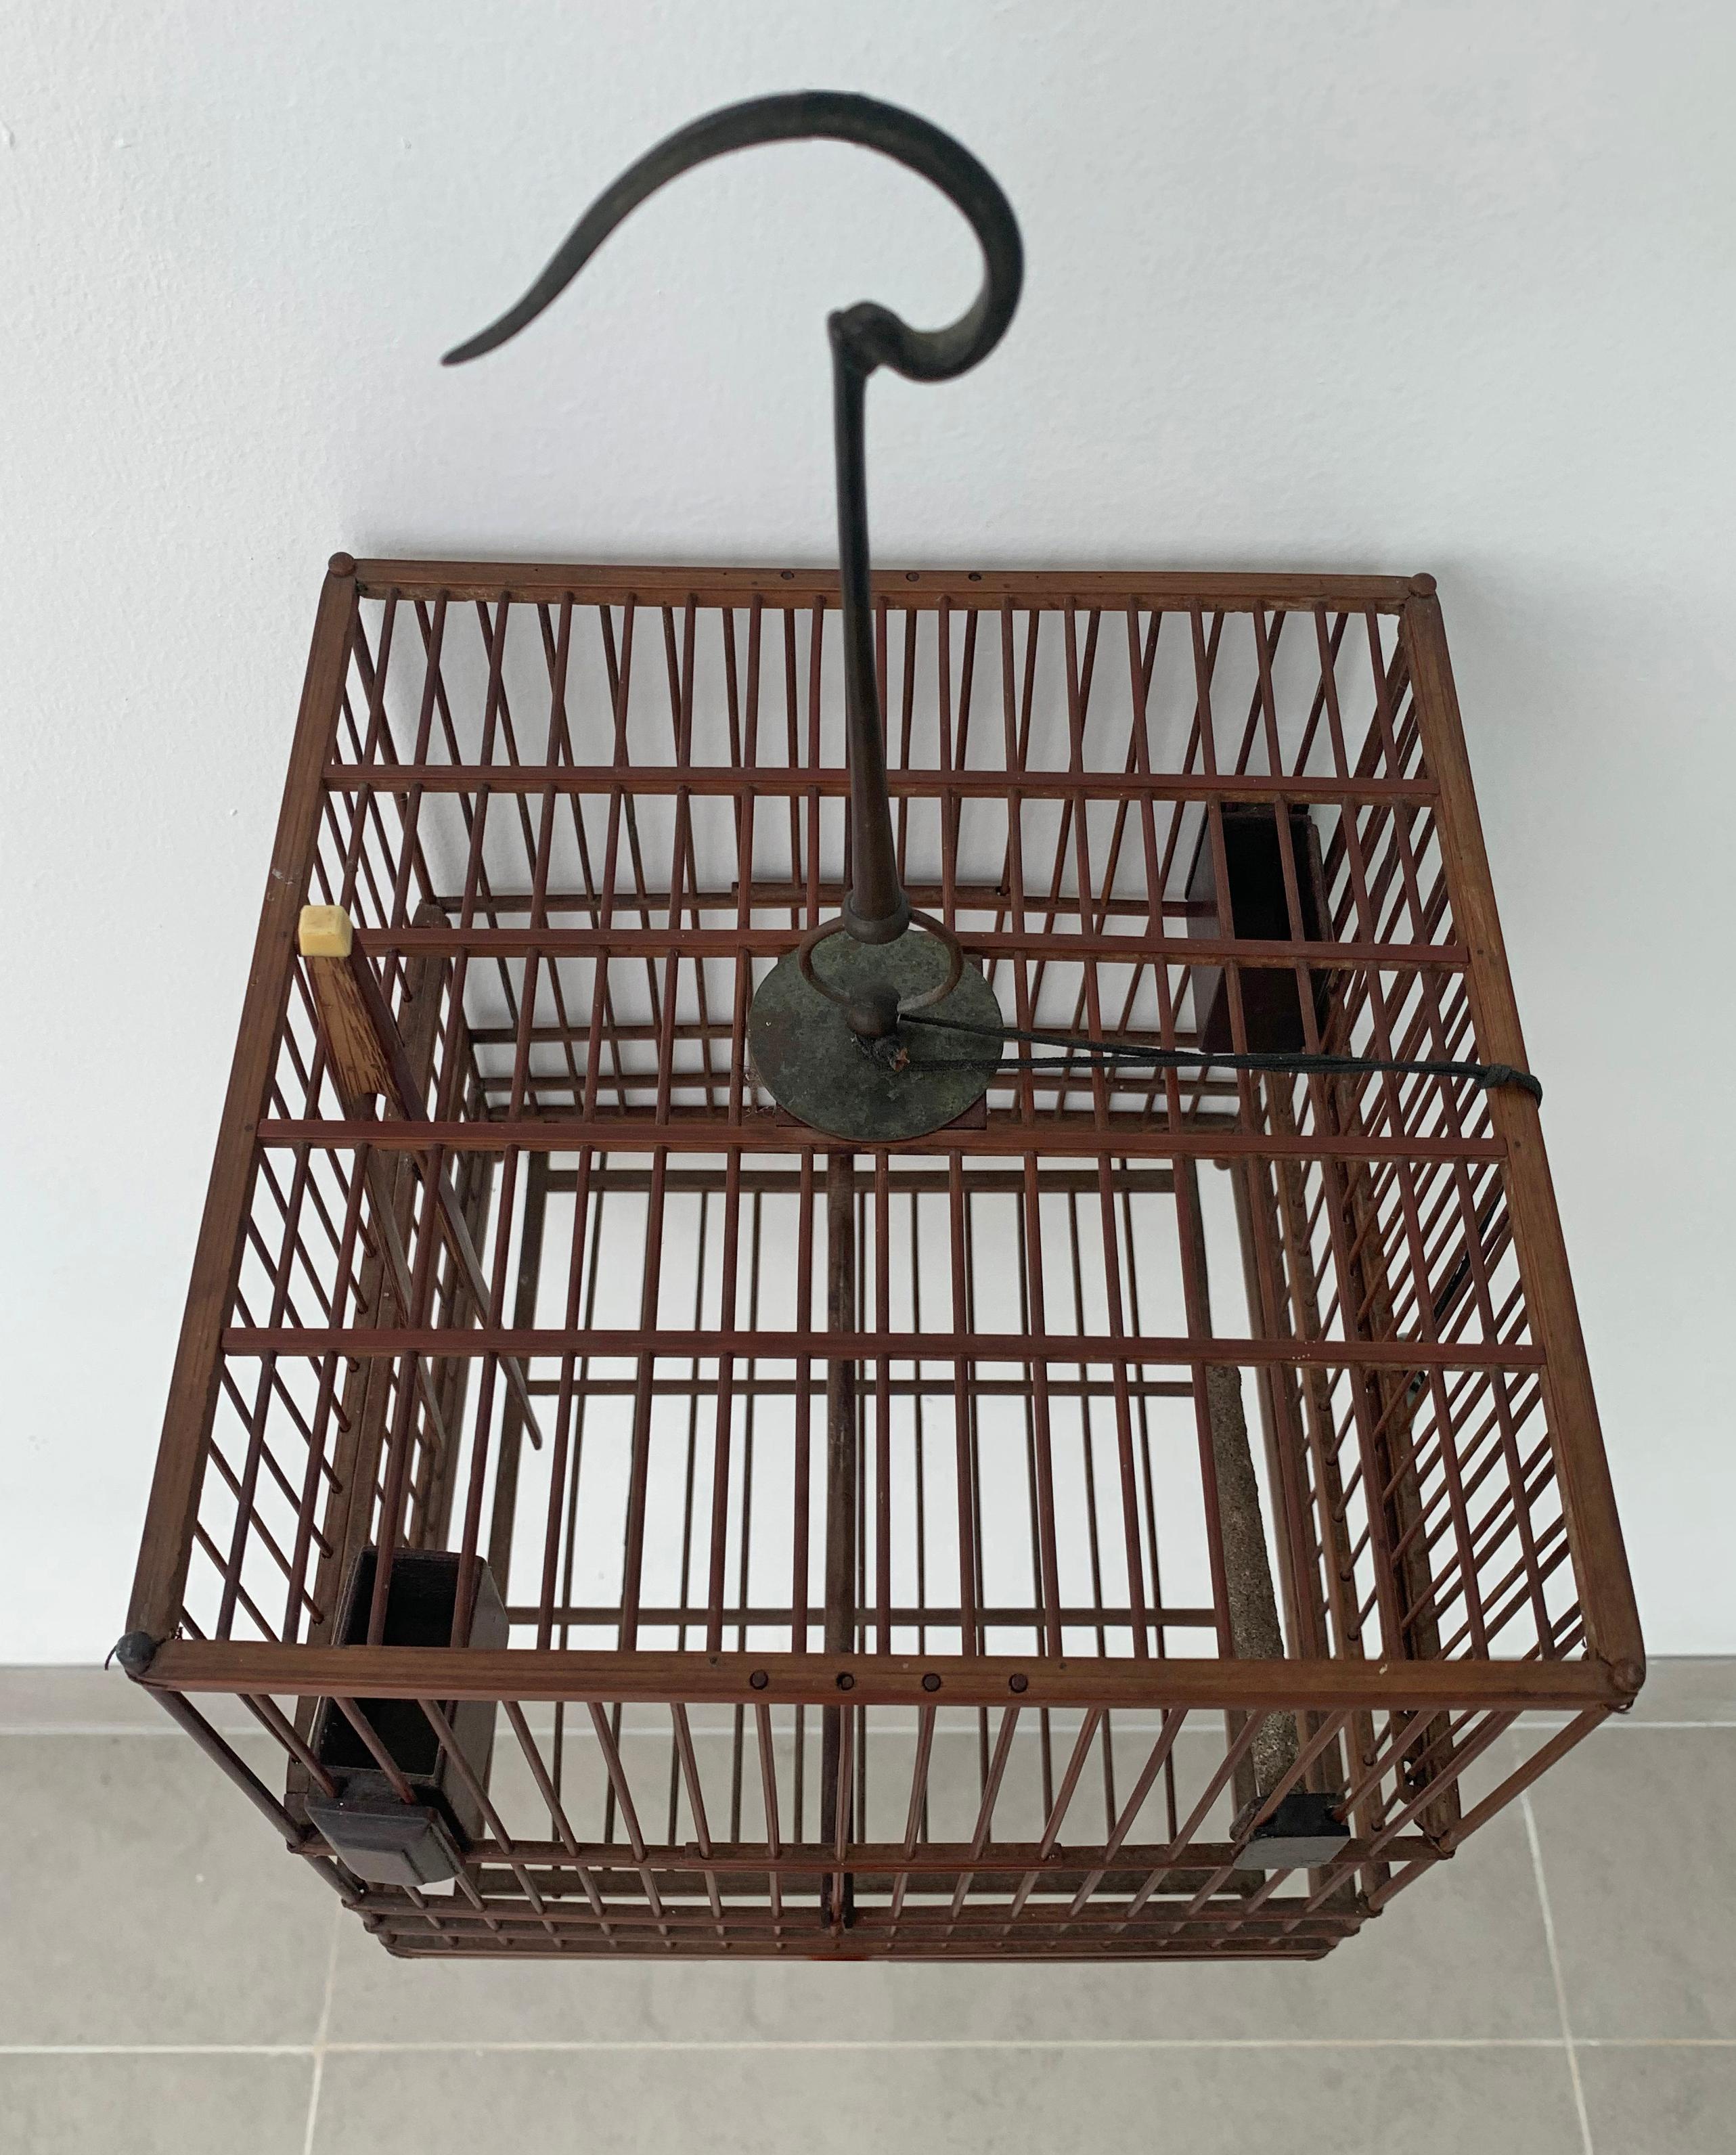 Chinese Birdcage with Porcelain Feeding Bowls, Vintage Mid-20th Century For Sale 3